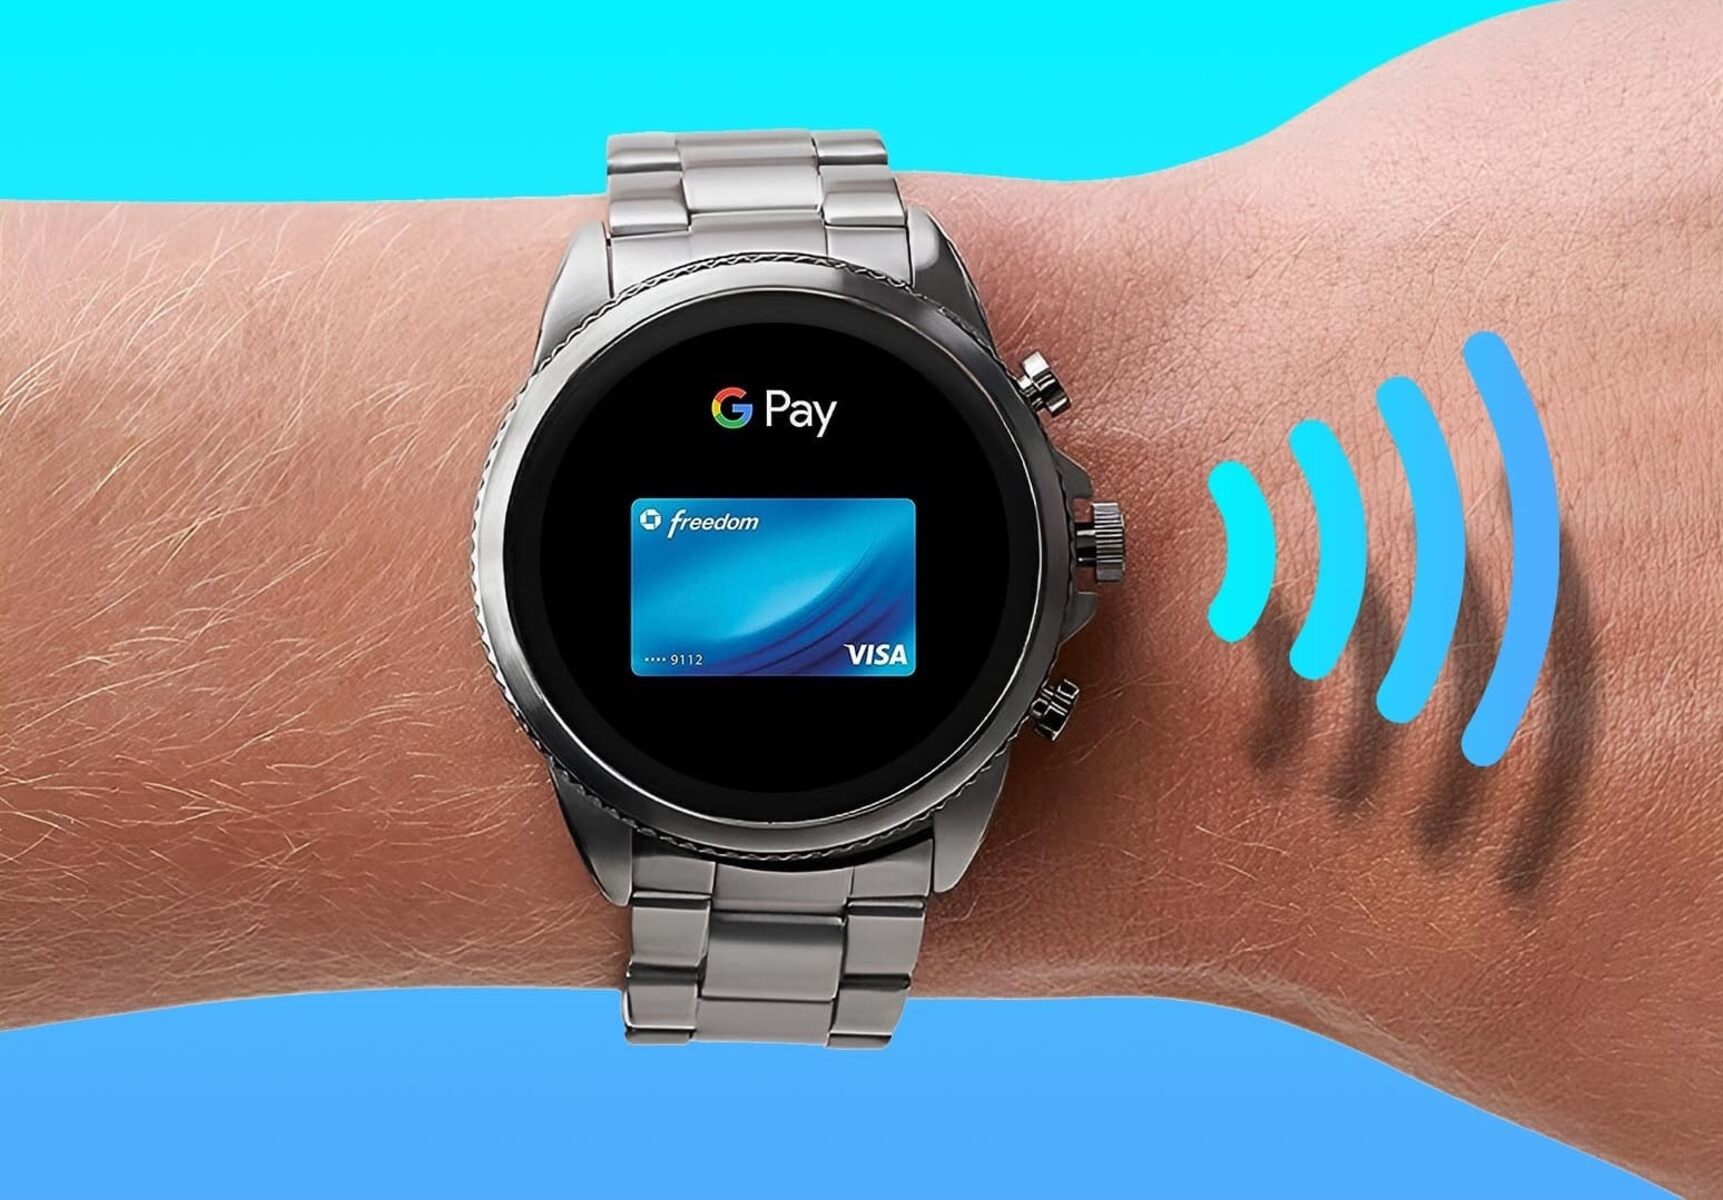 nfc-on-smartwatches-exploring-near-field-communication